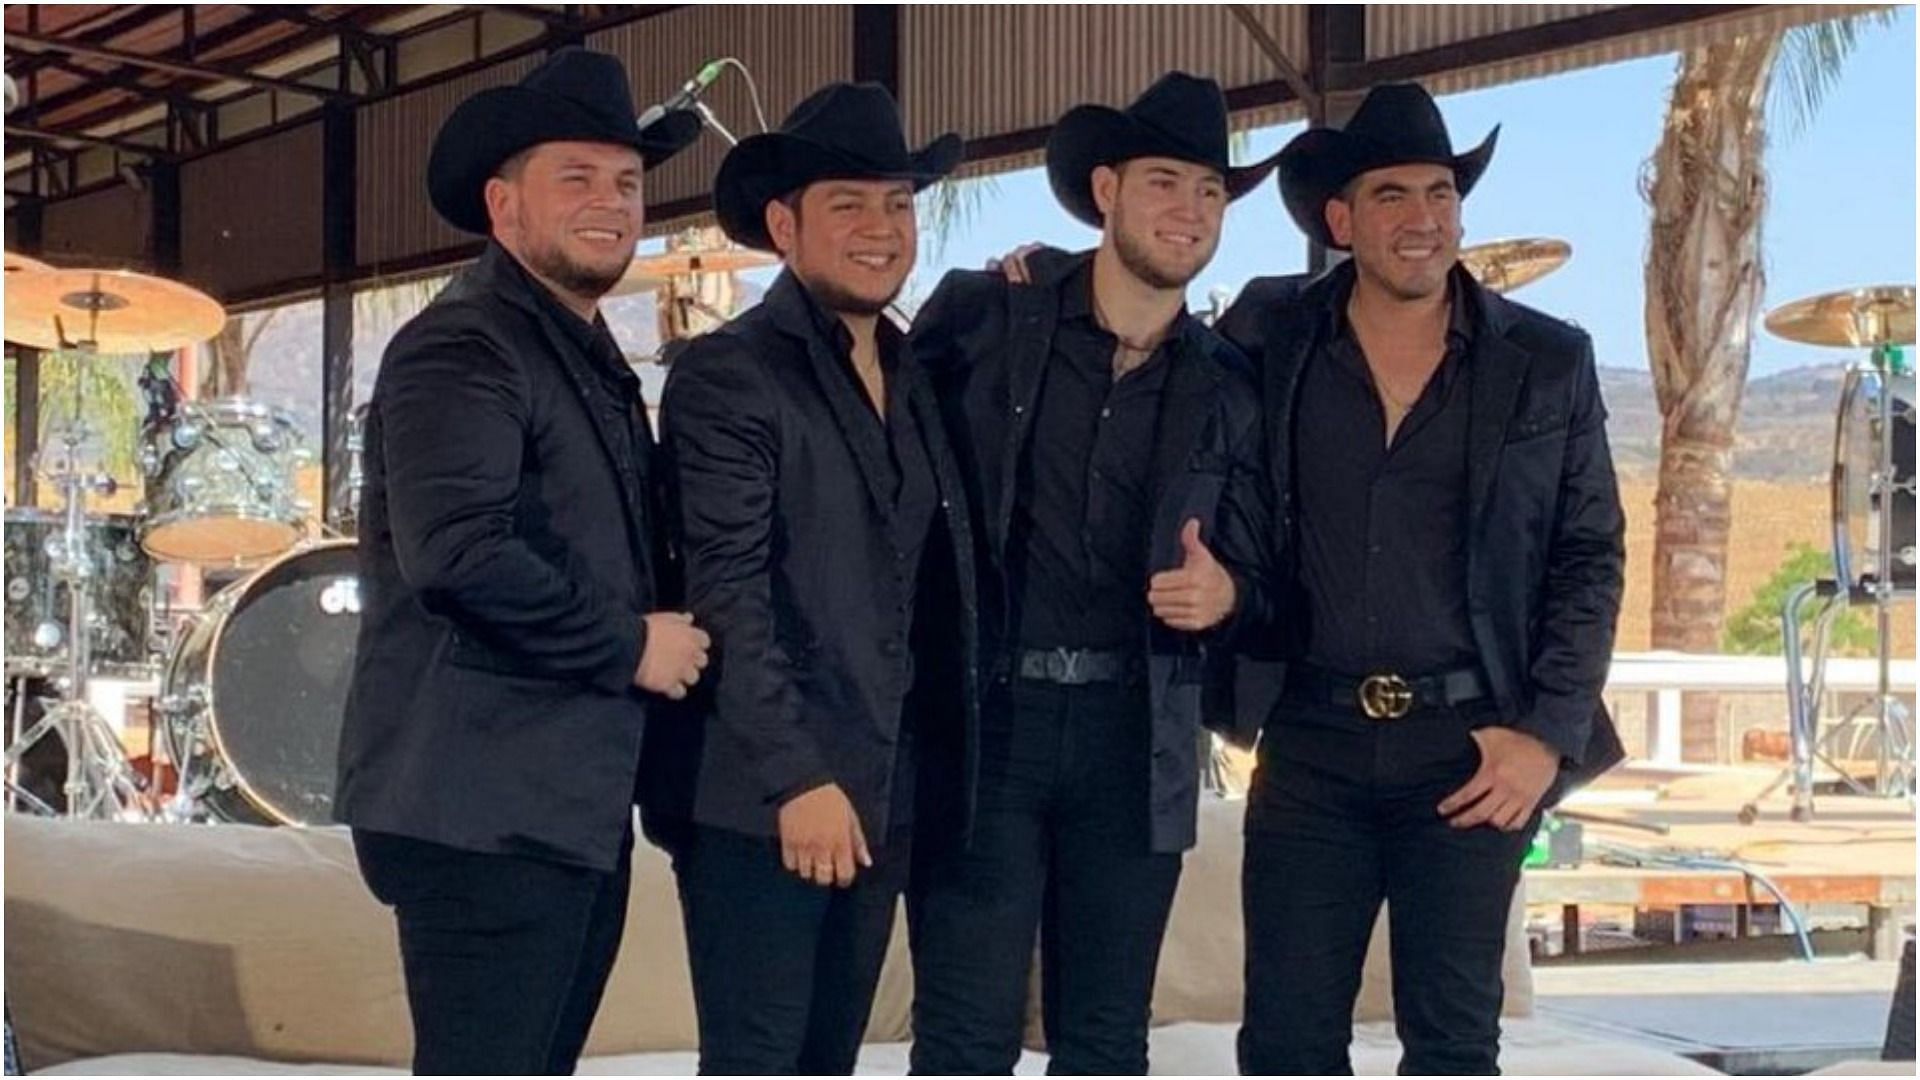 Who is Tony Elizondo? All about Calibre 50's new lead singer